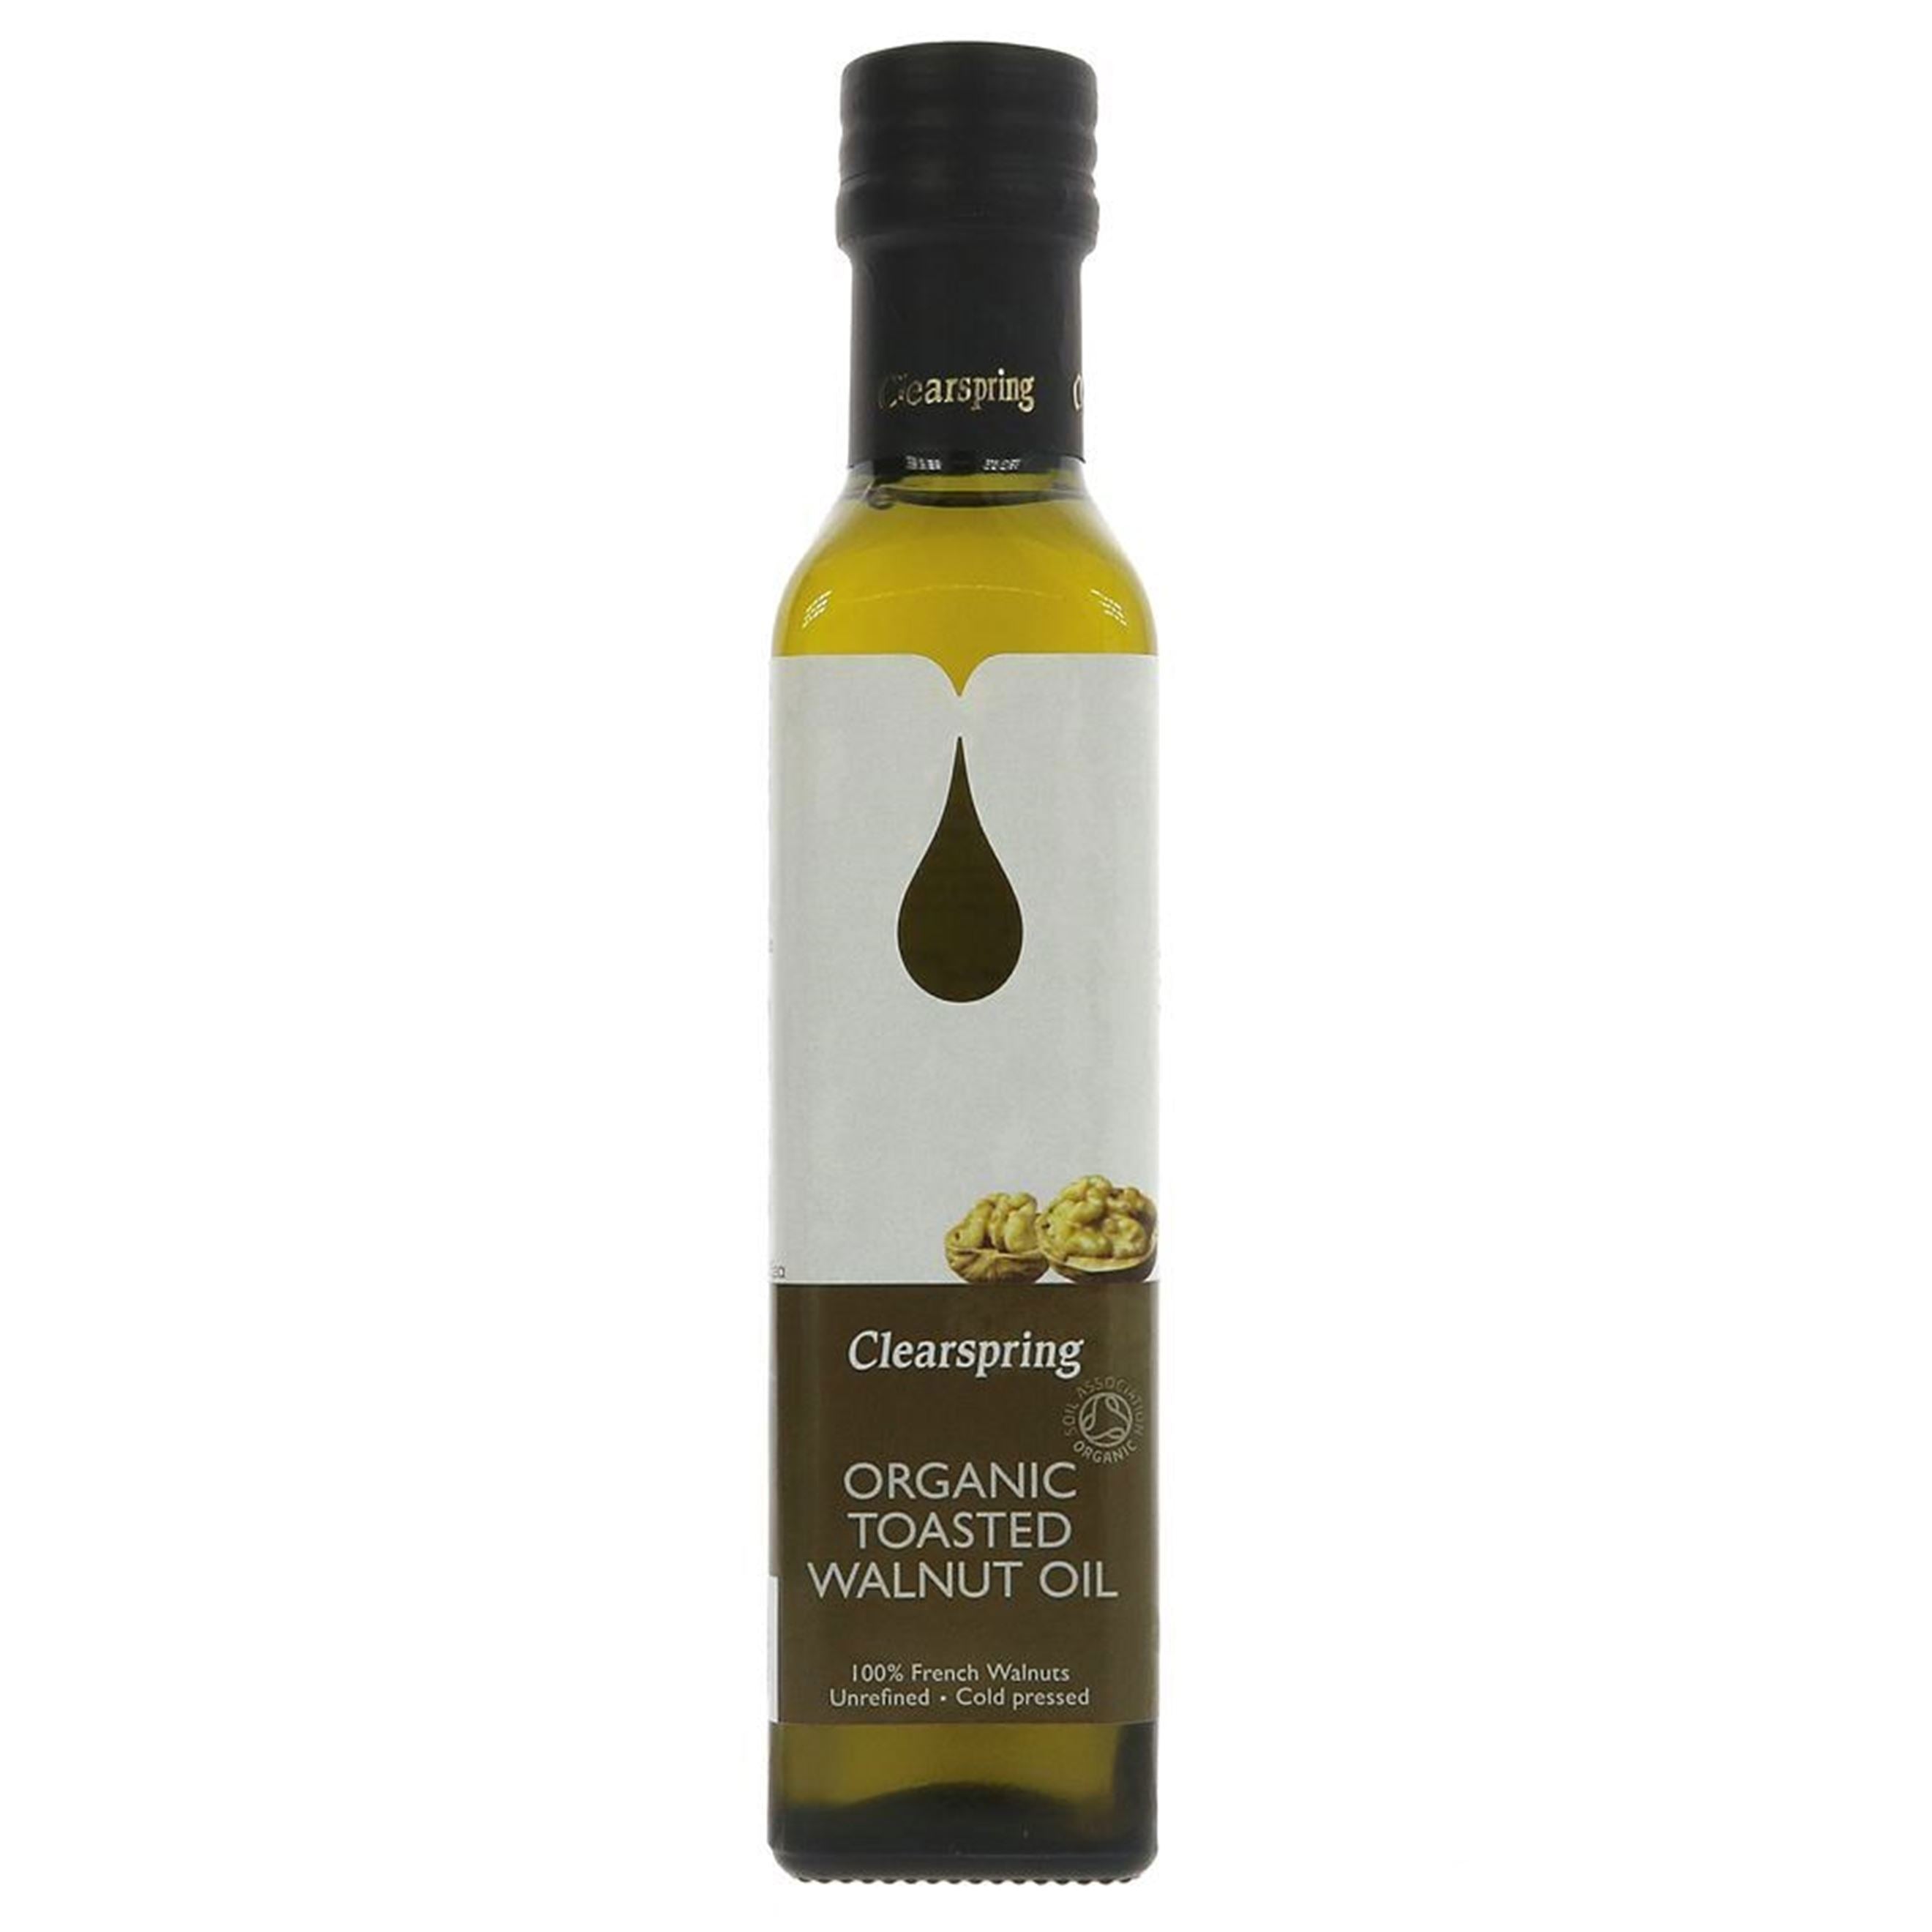 Clearspring Organic Toasted Walnut Oil